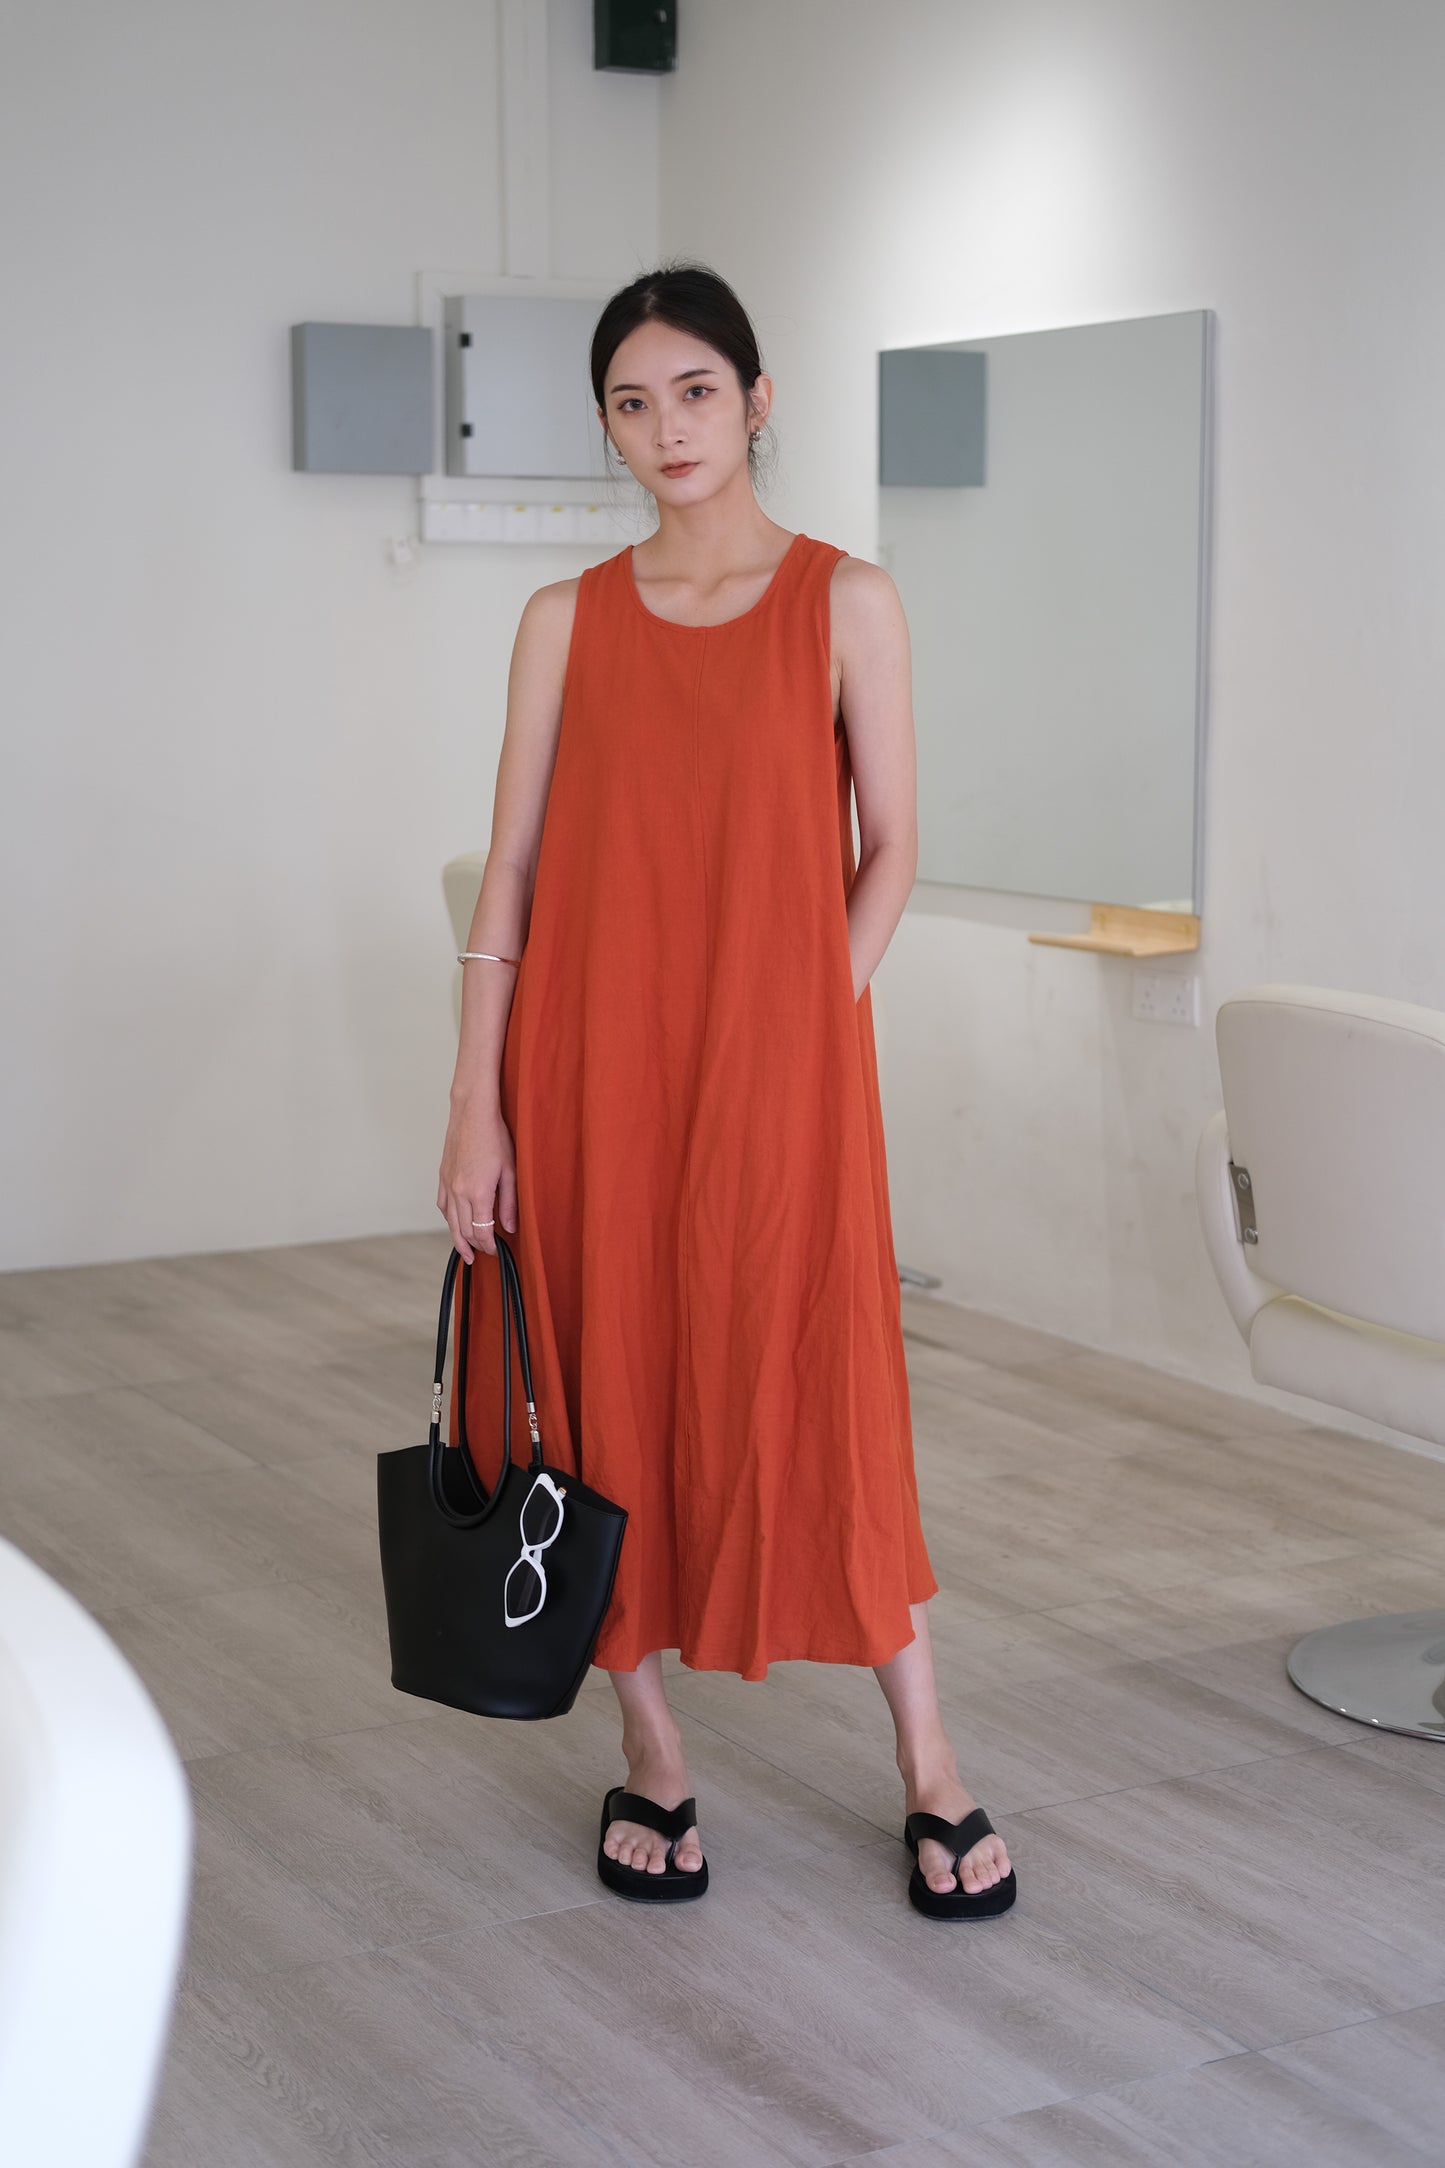 Sleeveless cotton and linen dress in brick red